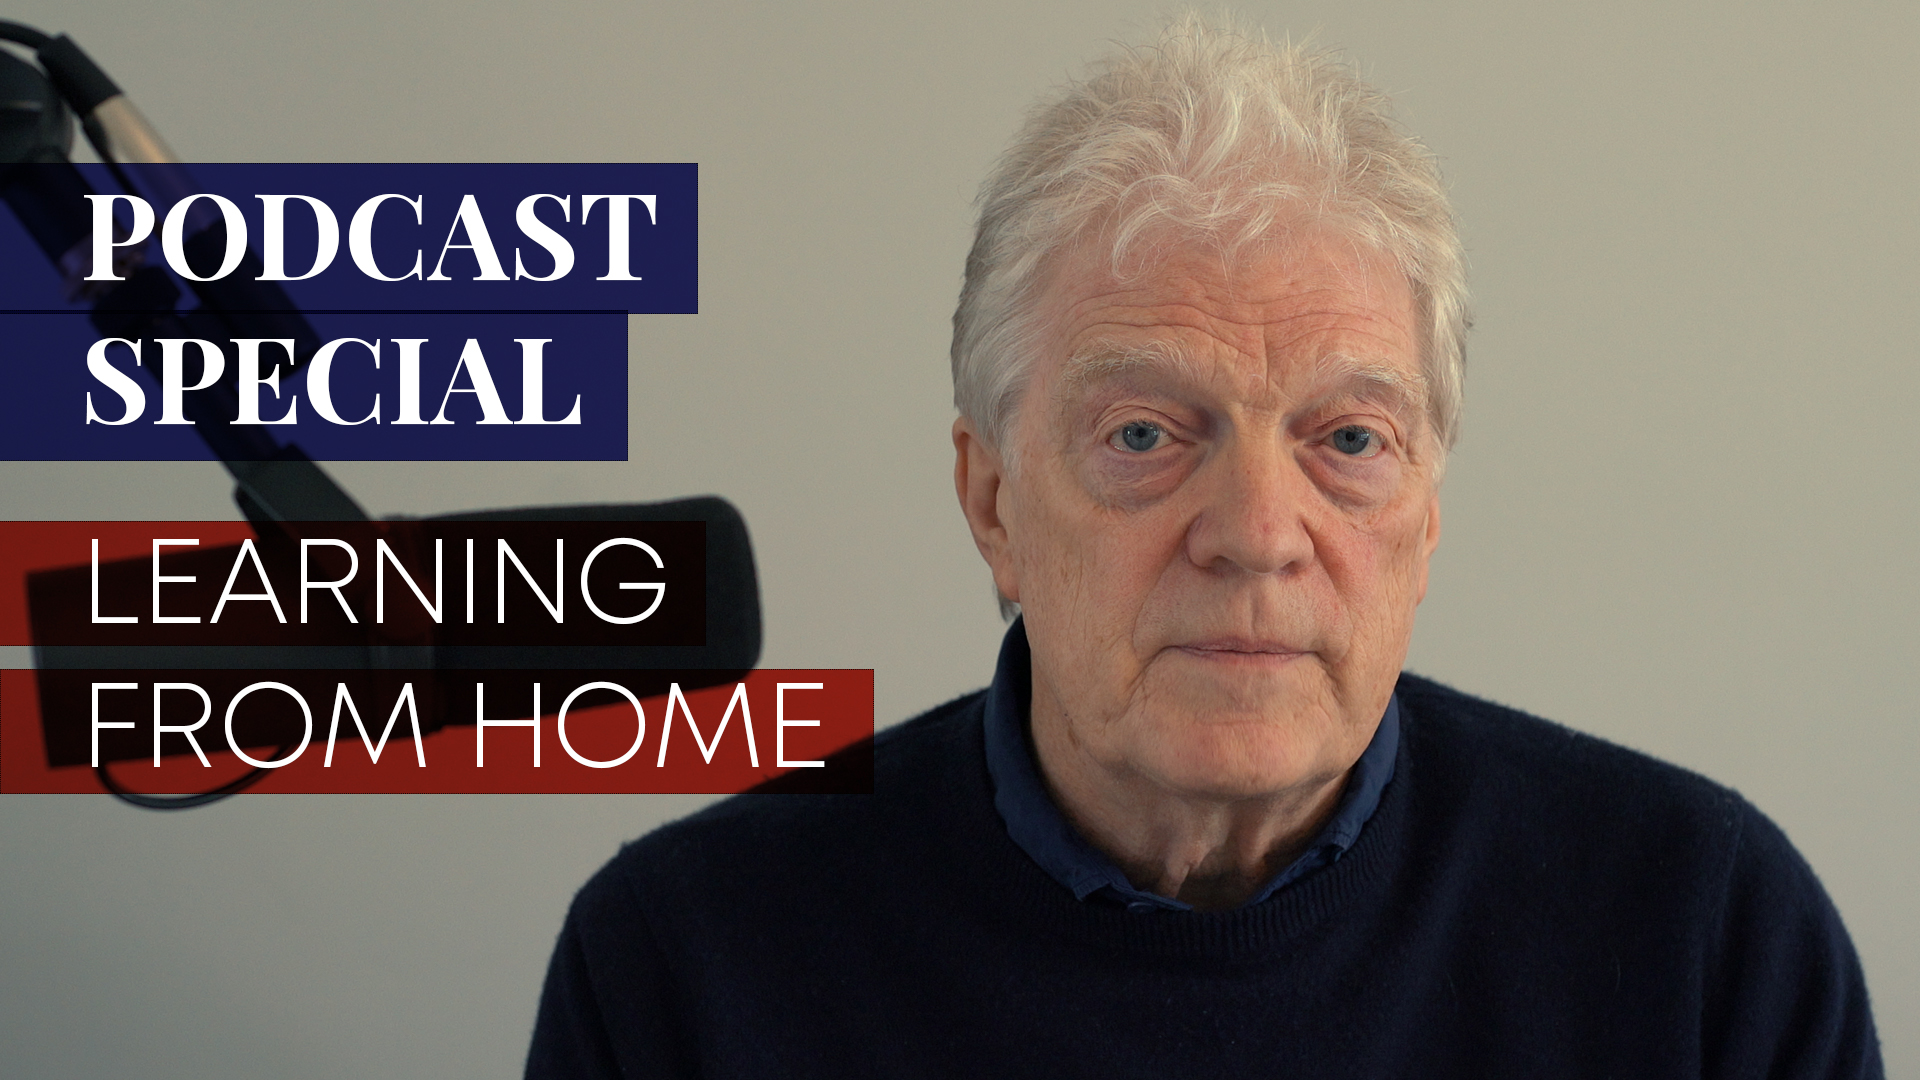 NEW Podcast/Video Series: Learning from Home - Sir Ken Robinson